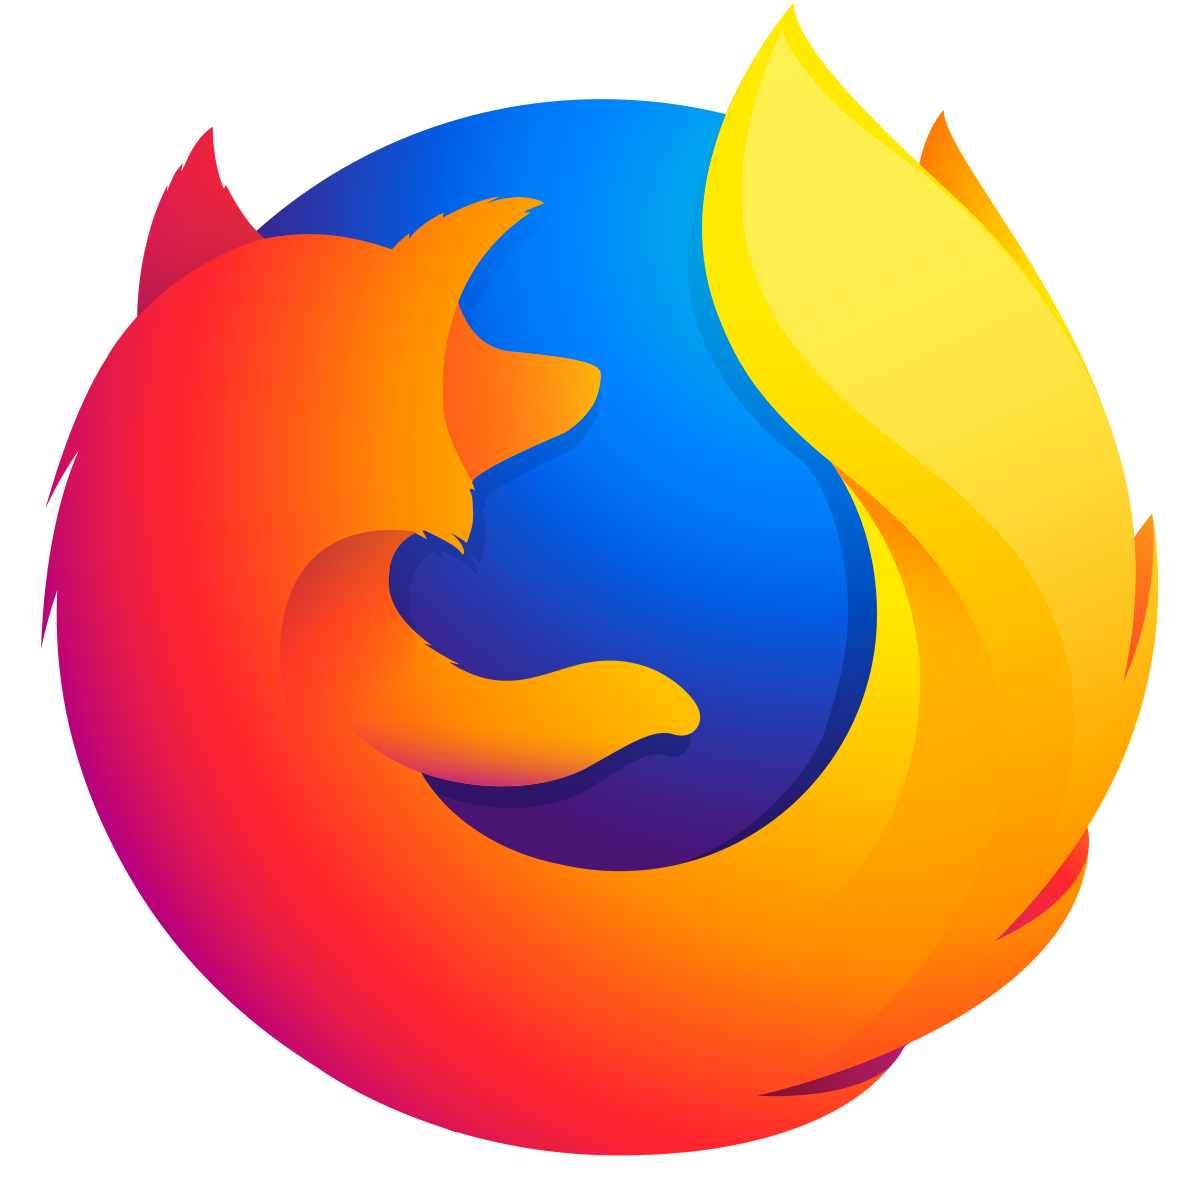 DOWNLOAD_A_PRESENTATION_IN_A_PDF_FORMAT_firefox-icon.png